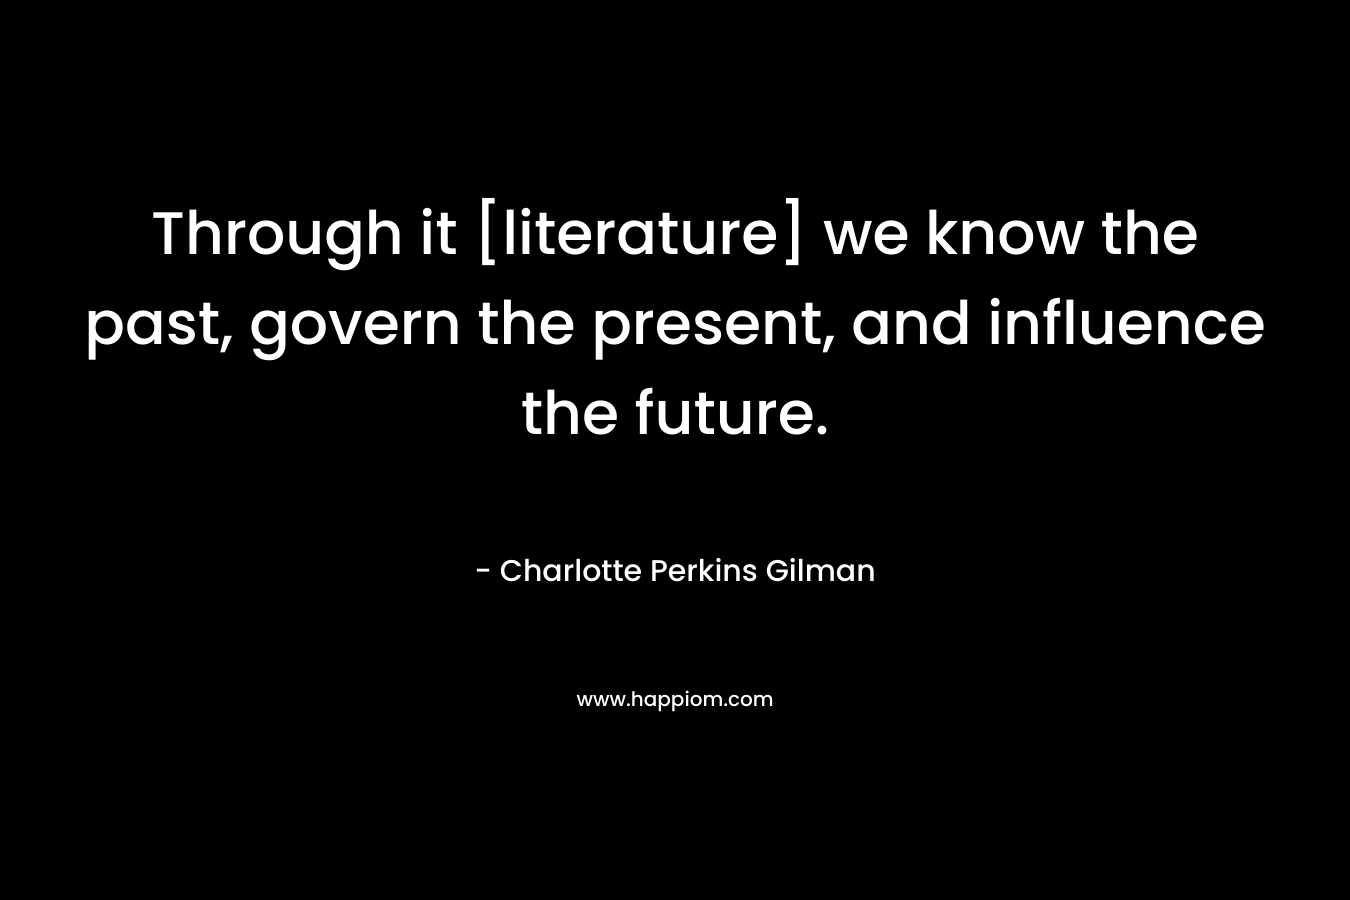 Through it [literature] we know the past, govern the present, and influence the future.